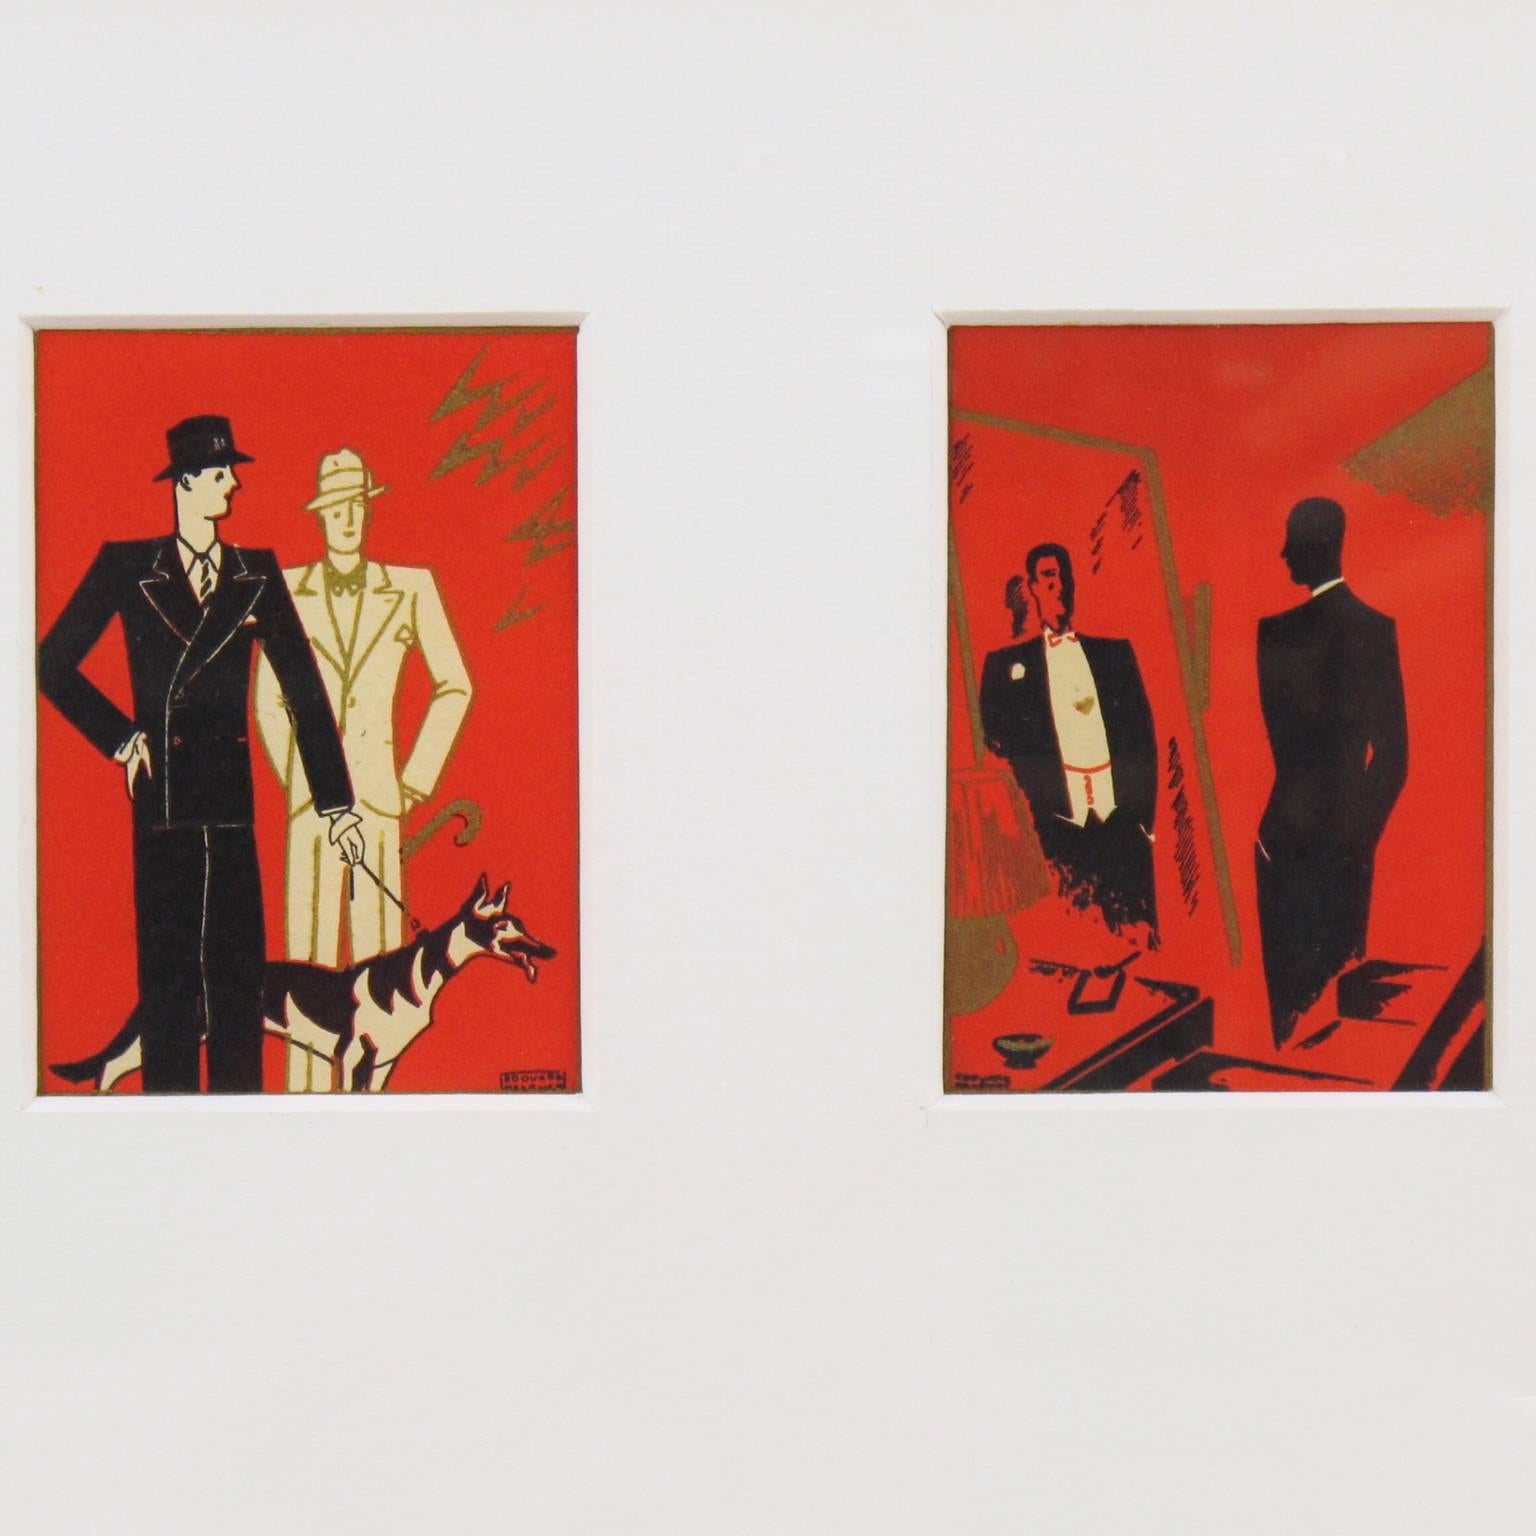 Stunning French Art Deco original illustration or drawing, set of four, with Chinese ink and gilt paint on red paper by Edouard Halouze. Featuring men’s fashion and scenes or what we can named: 'Art Deco Life as a Dandy'. Each drawing is signed